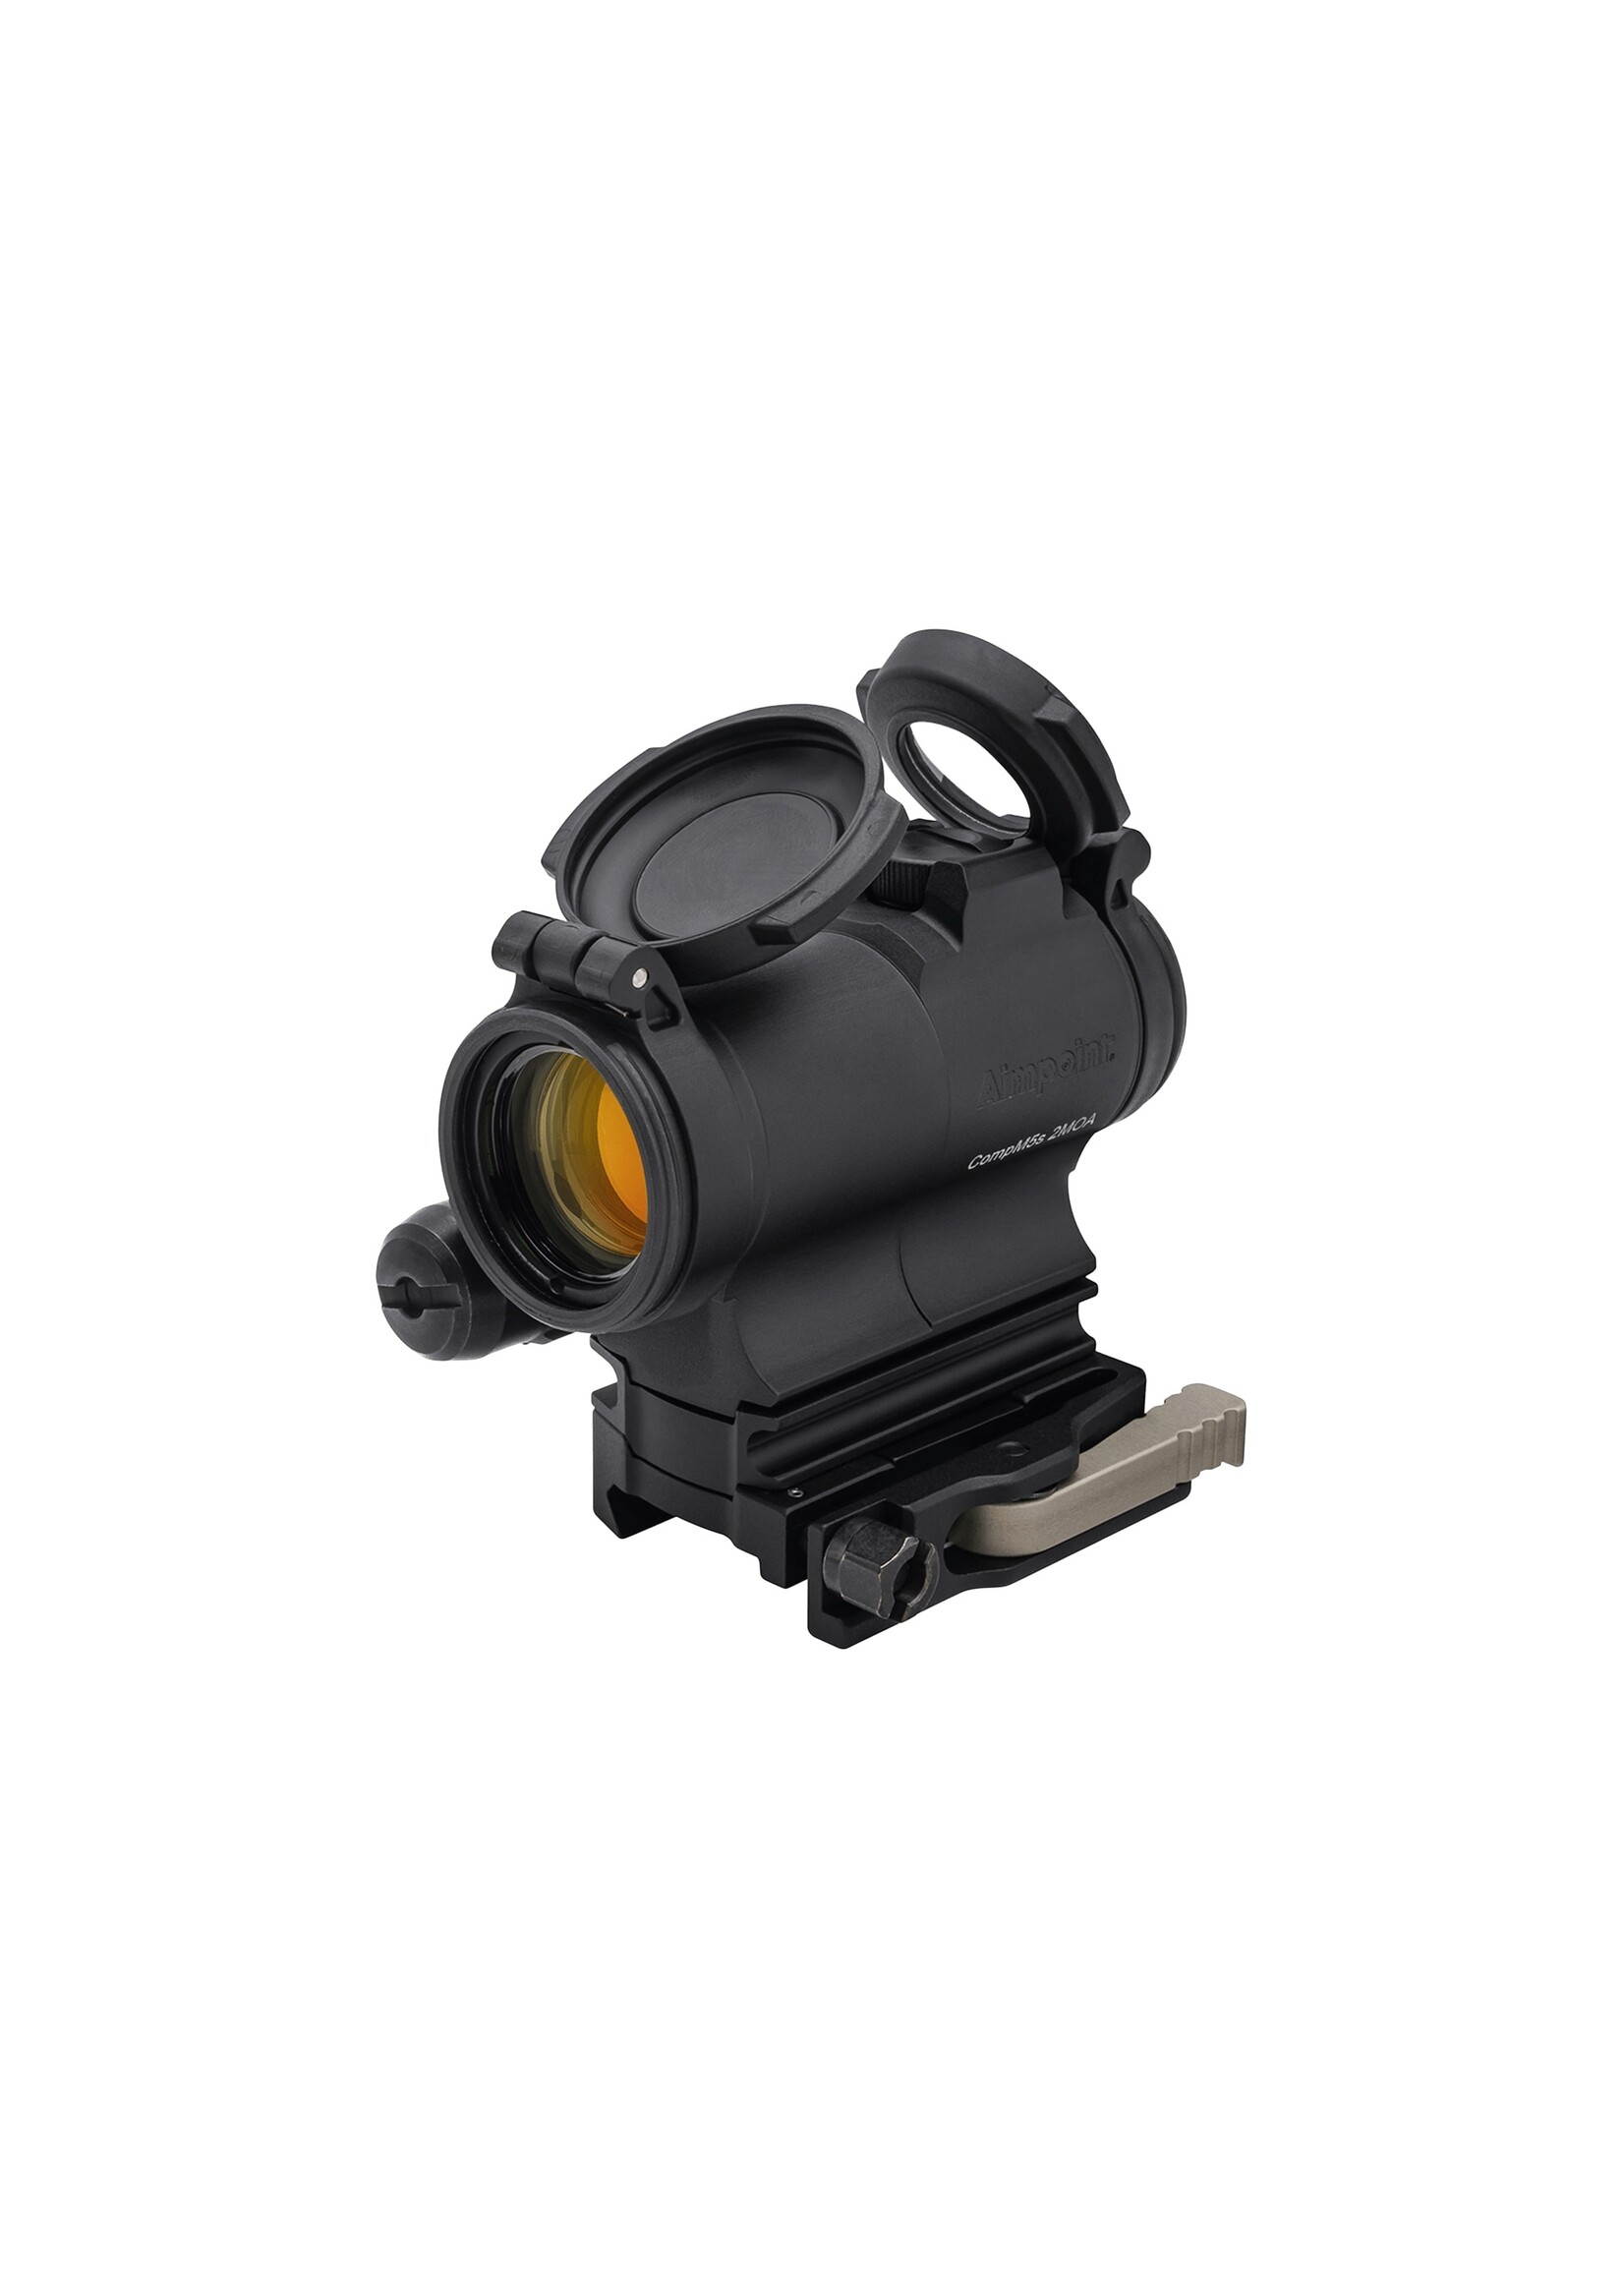 AIMPOINT COMPM5S RED DOT REFLEX SIGHT - AR15 READY